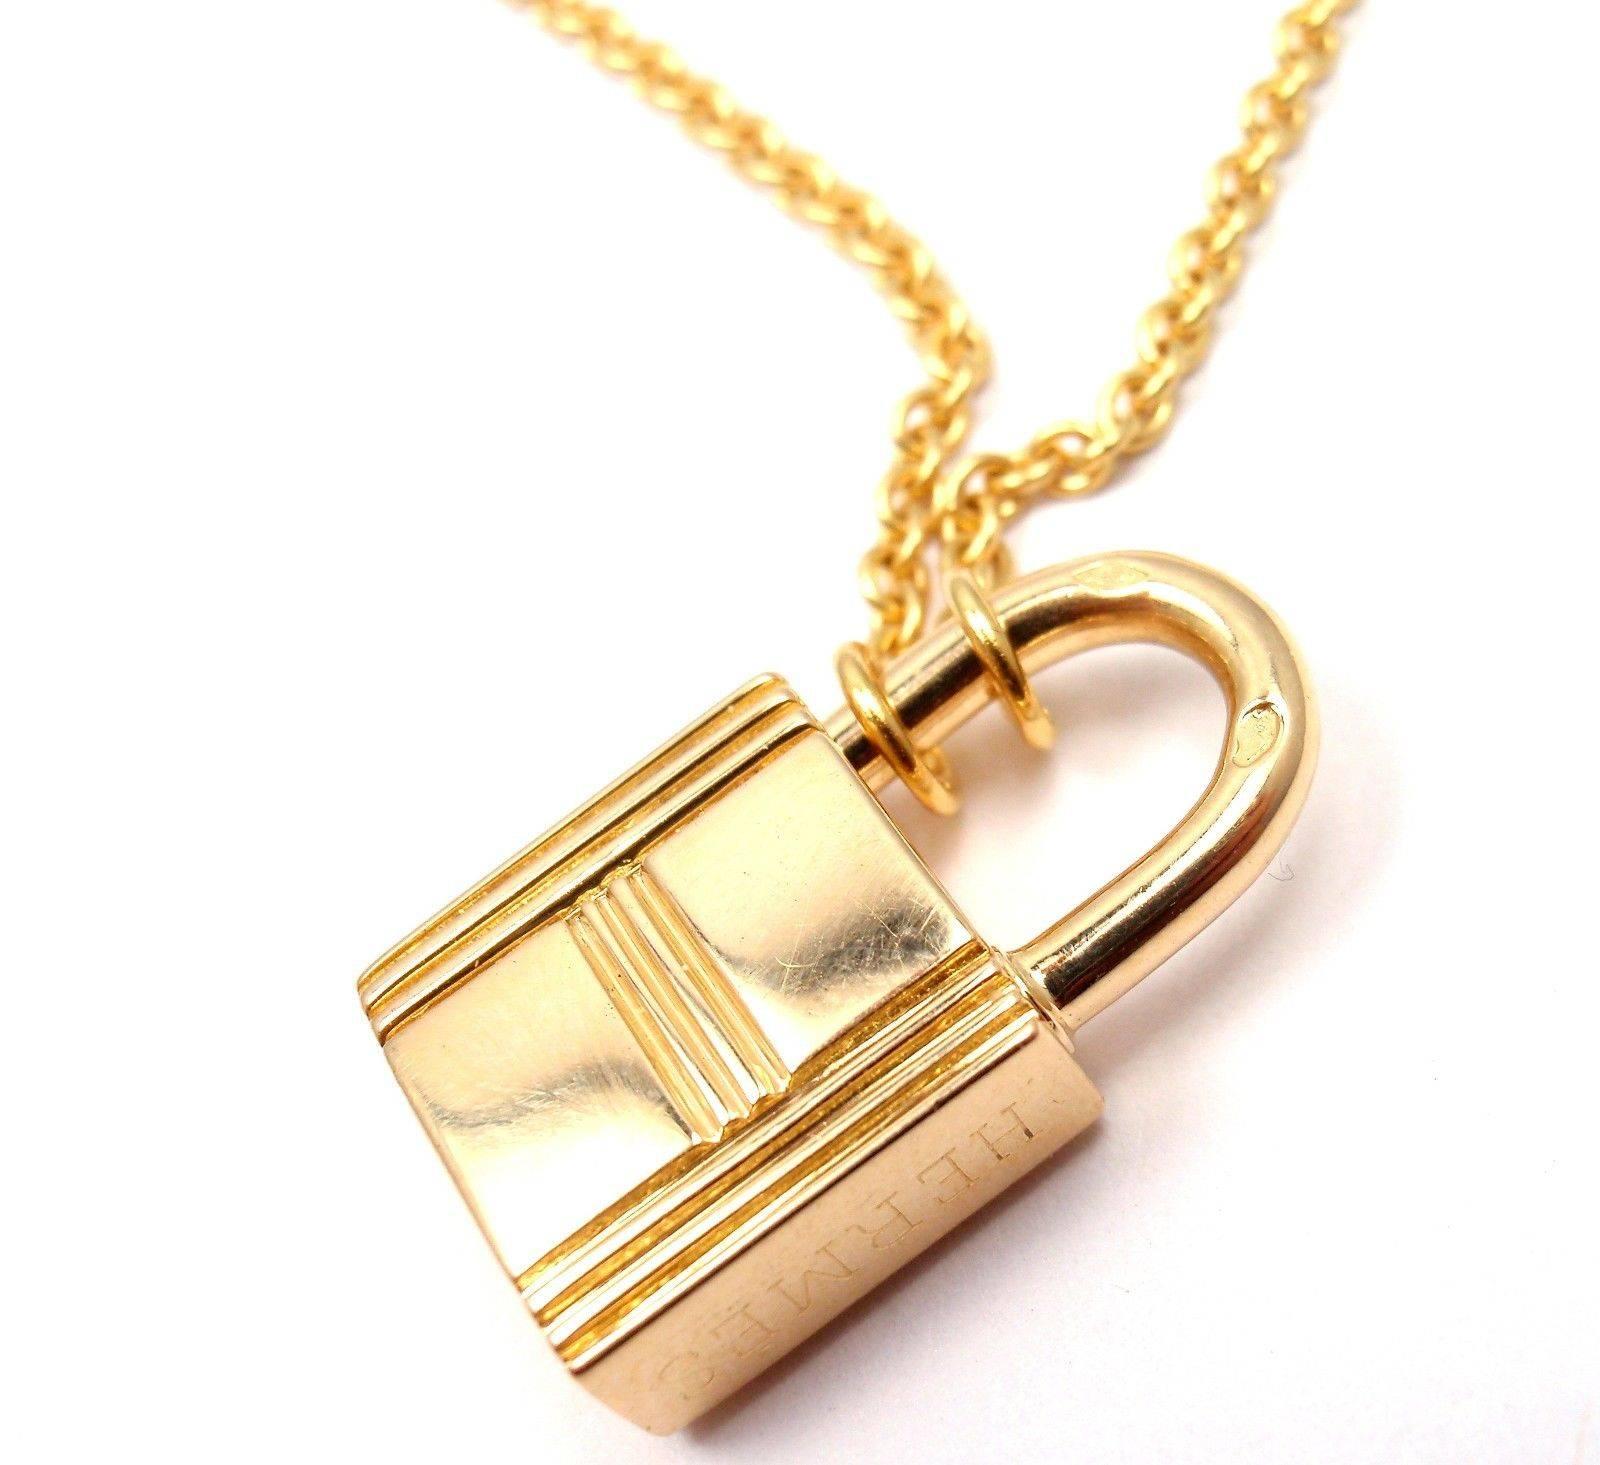 18k Yellow Gold Lock Pendant Charm Chain Necklace by Hermes. 

Details: 
Weight: 16.8 grams
Pendant Size: 11.5mm x 21mm x 6mm
Necklace Length: 17"
Stamped Hallmarks: Hermes AU 750 French Hallmark 
*Free Shipping within the United